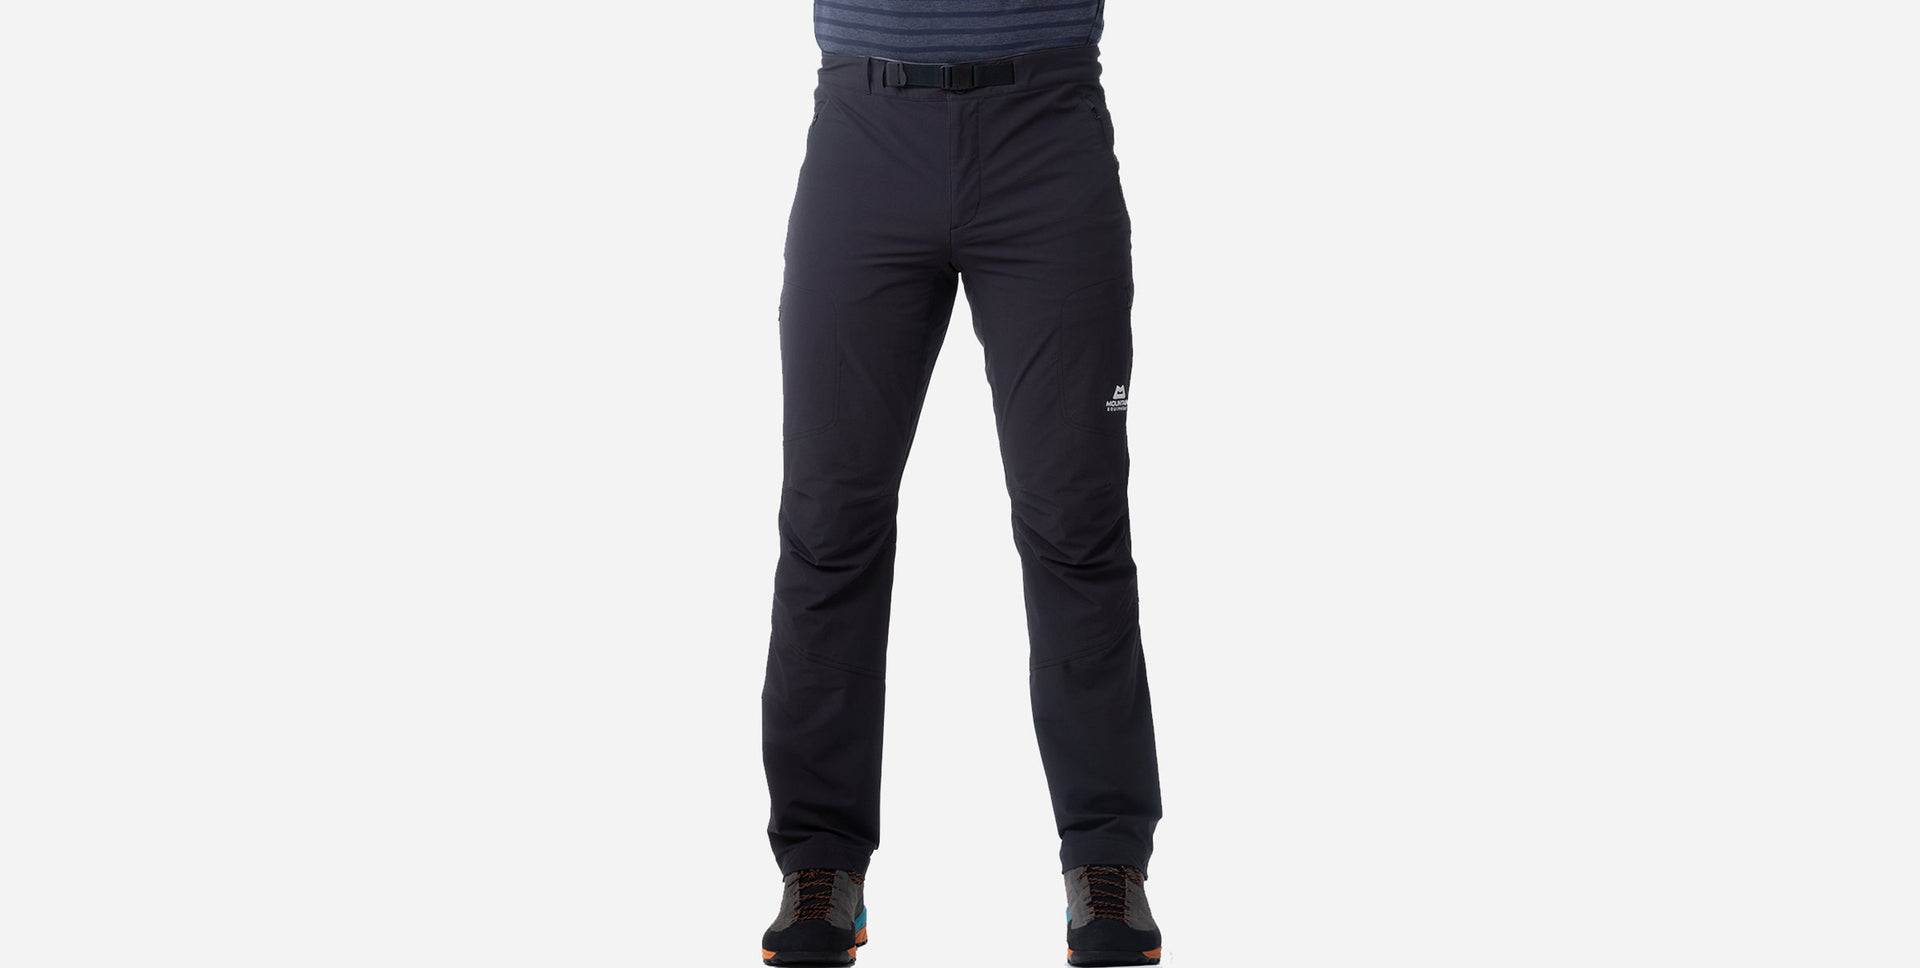 Mountain Equipment Ibex Pro Pants - The BEST all-round hiking